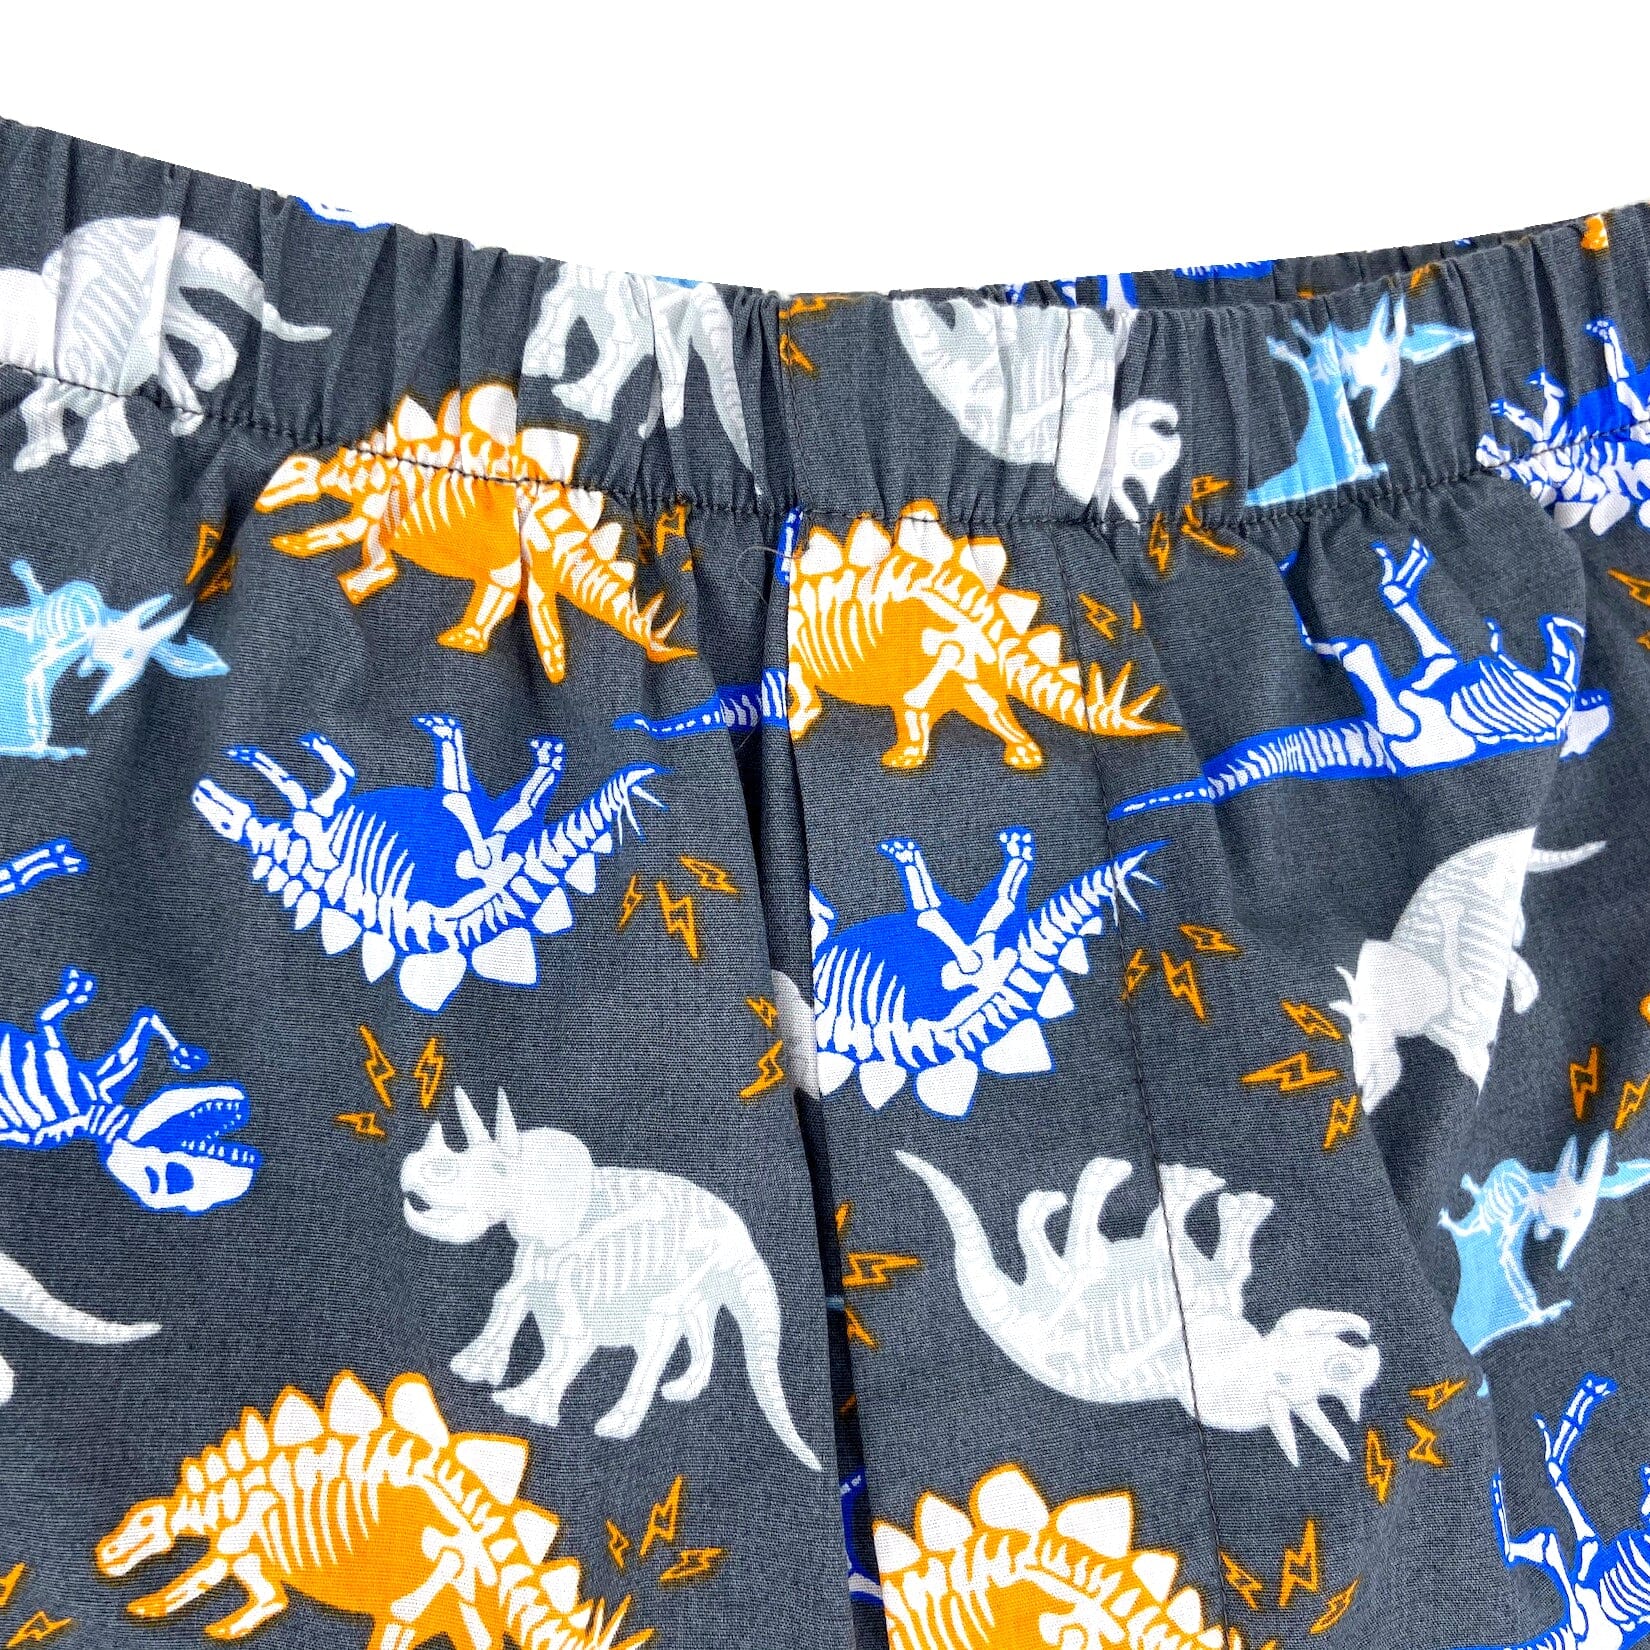  Men's Colorful Dino Fossil Patterned Cotton Lightweight Boxer Shorts